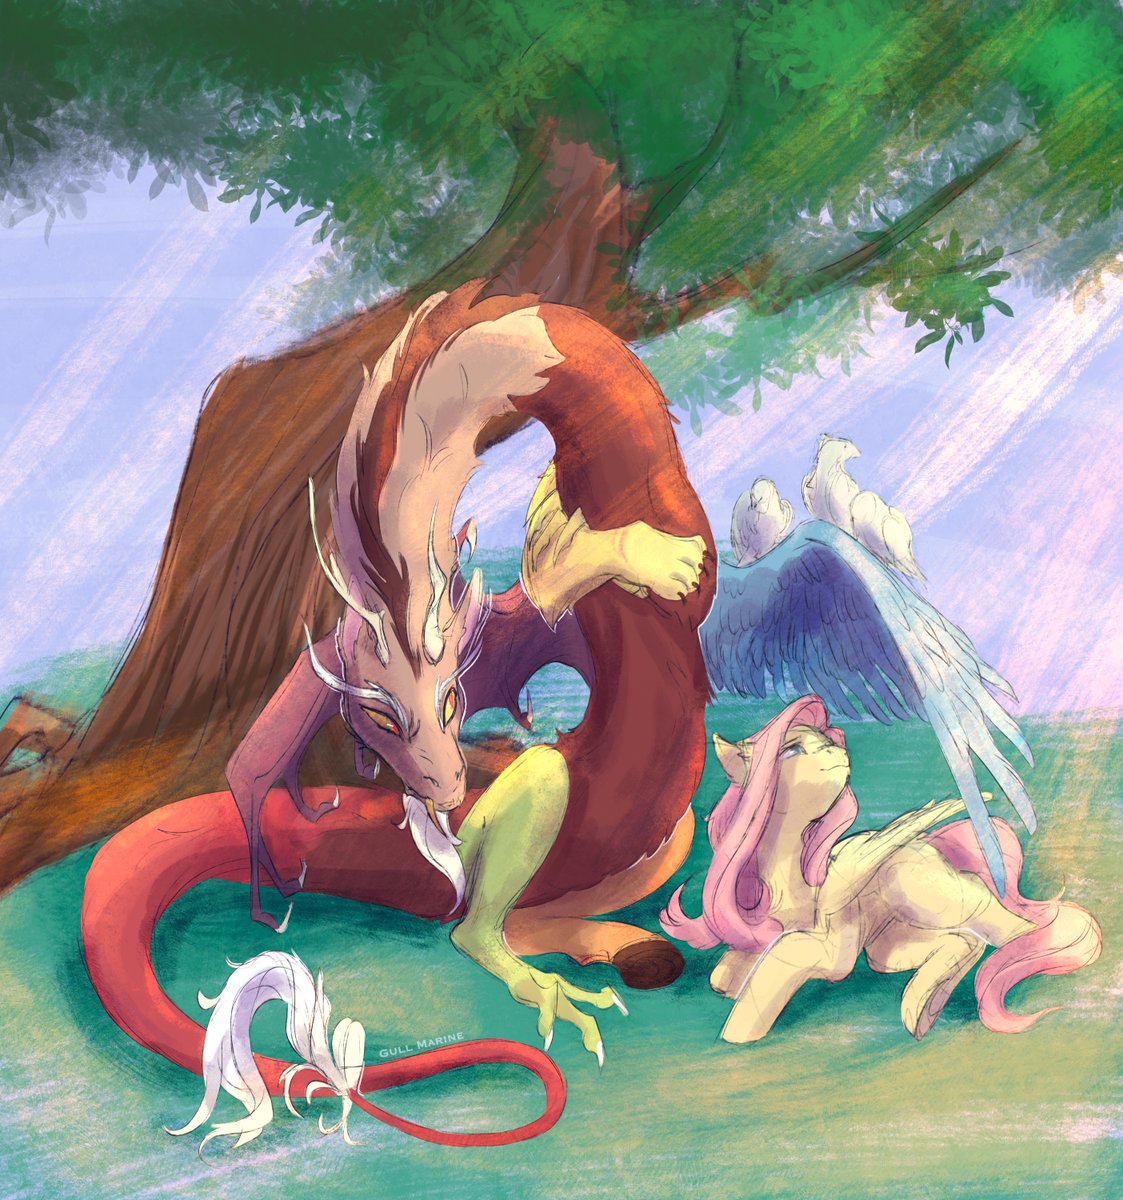 He's trying to make new friends. #mlp #fluttercord #fluttershy #discord